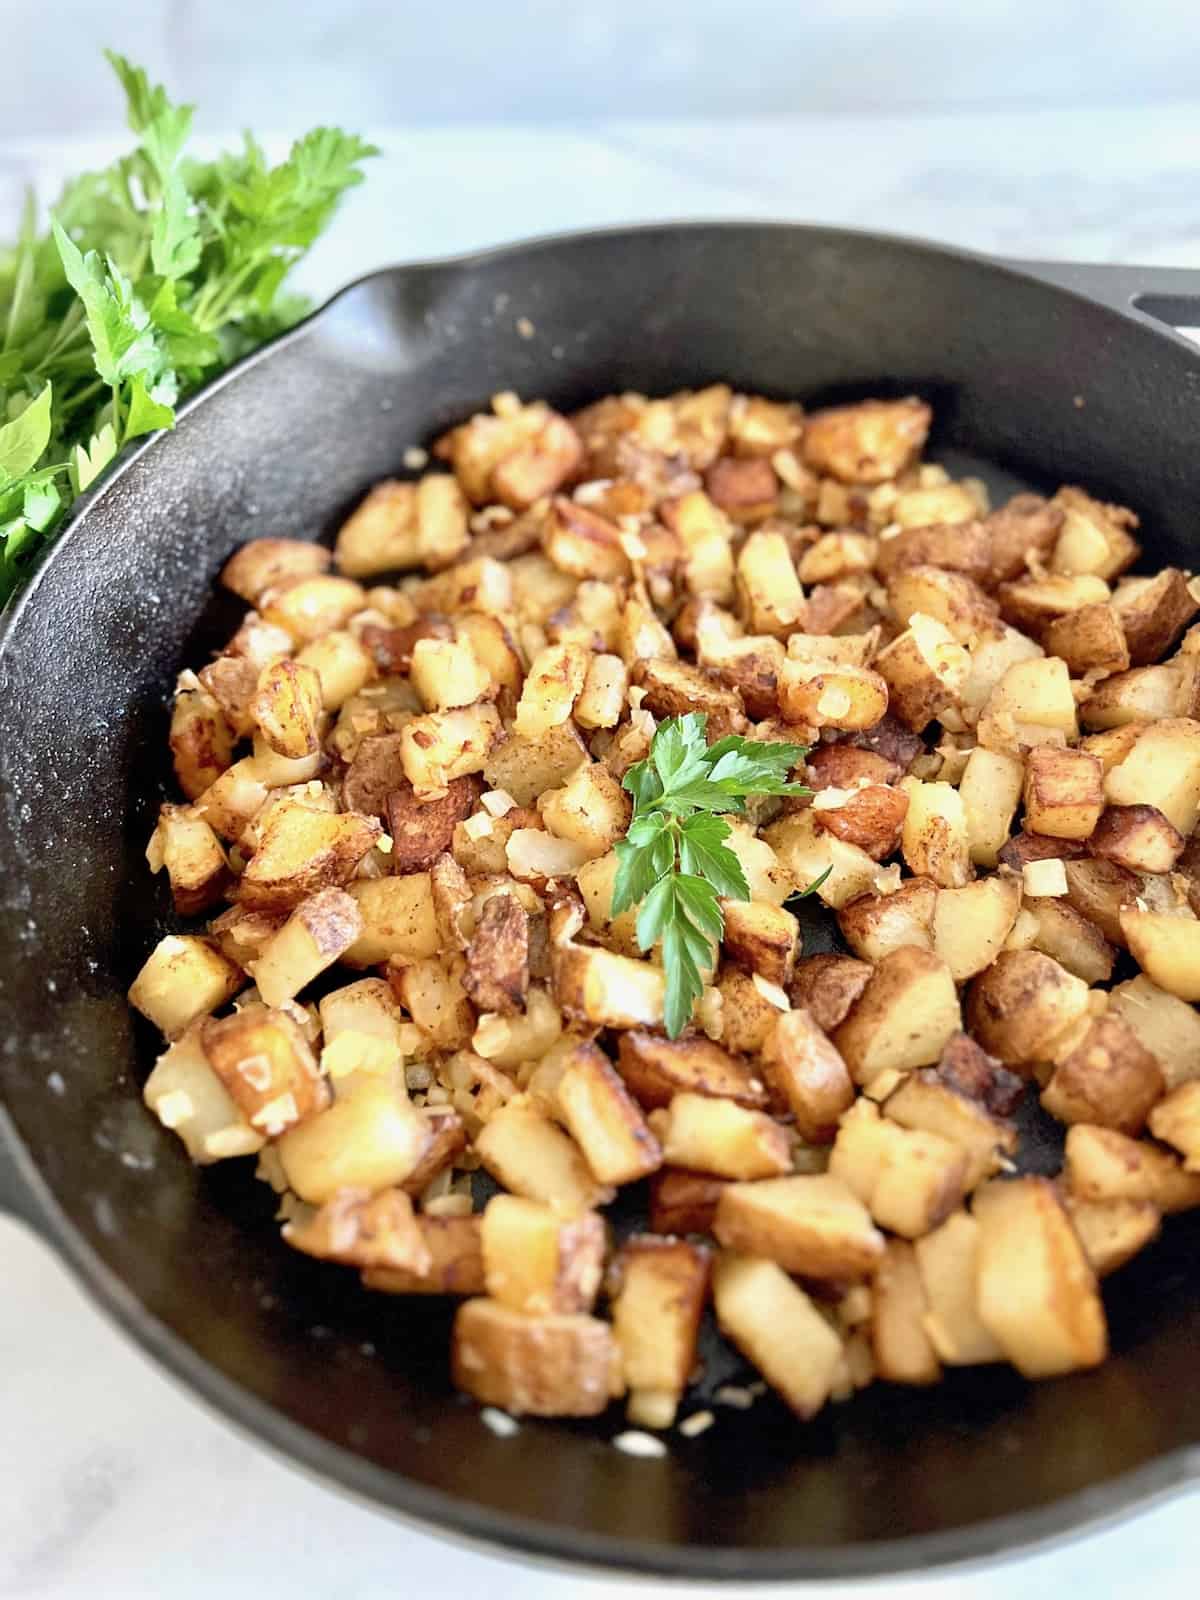 Pan Fried Potatoes & Onions Cast iron skillet filled & topped with parsley.